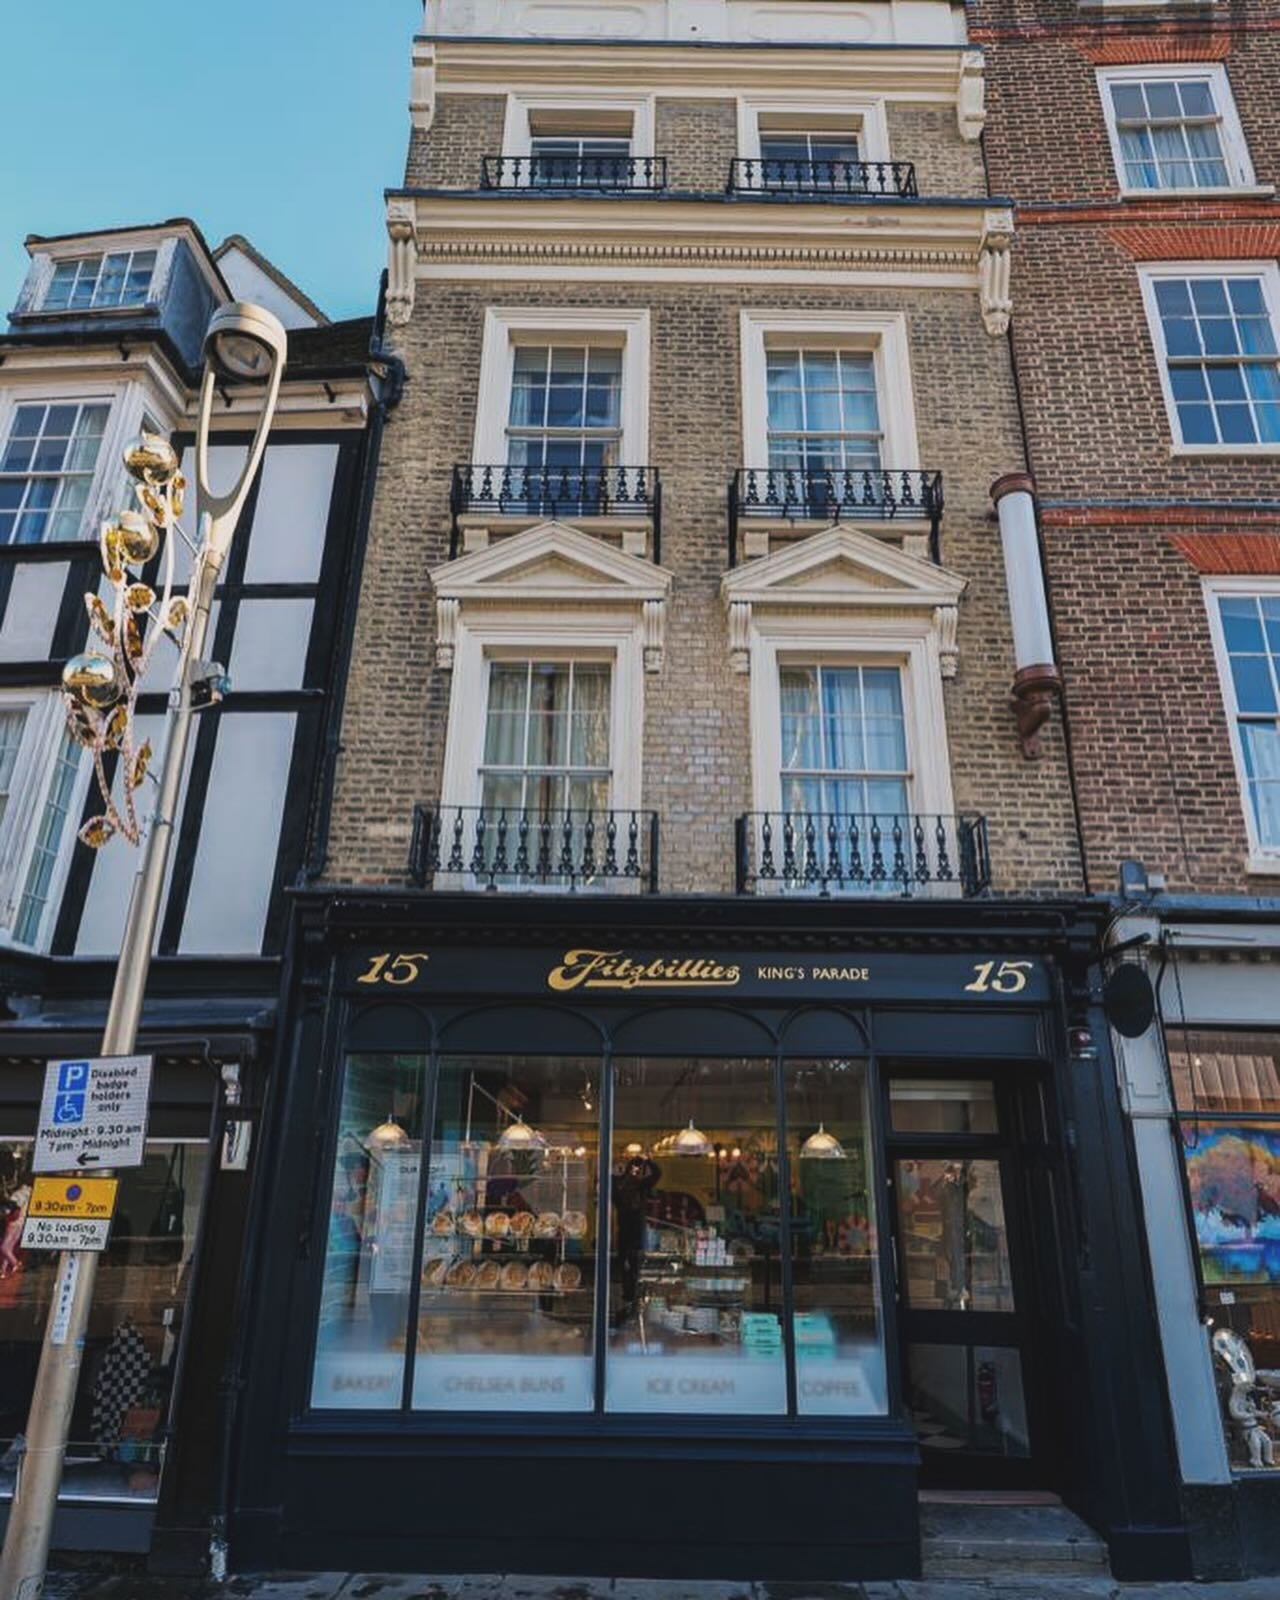 Always late to the party with these&hellip;&hellip; But another great privilege to be working on another little bit of history in central Cambridge on the new @fitzbillies&hellip;.

Always a pleasure working with &hellip;..
@cb1buildingandcarpentry2 